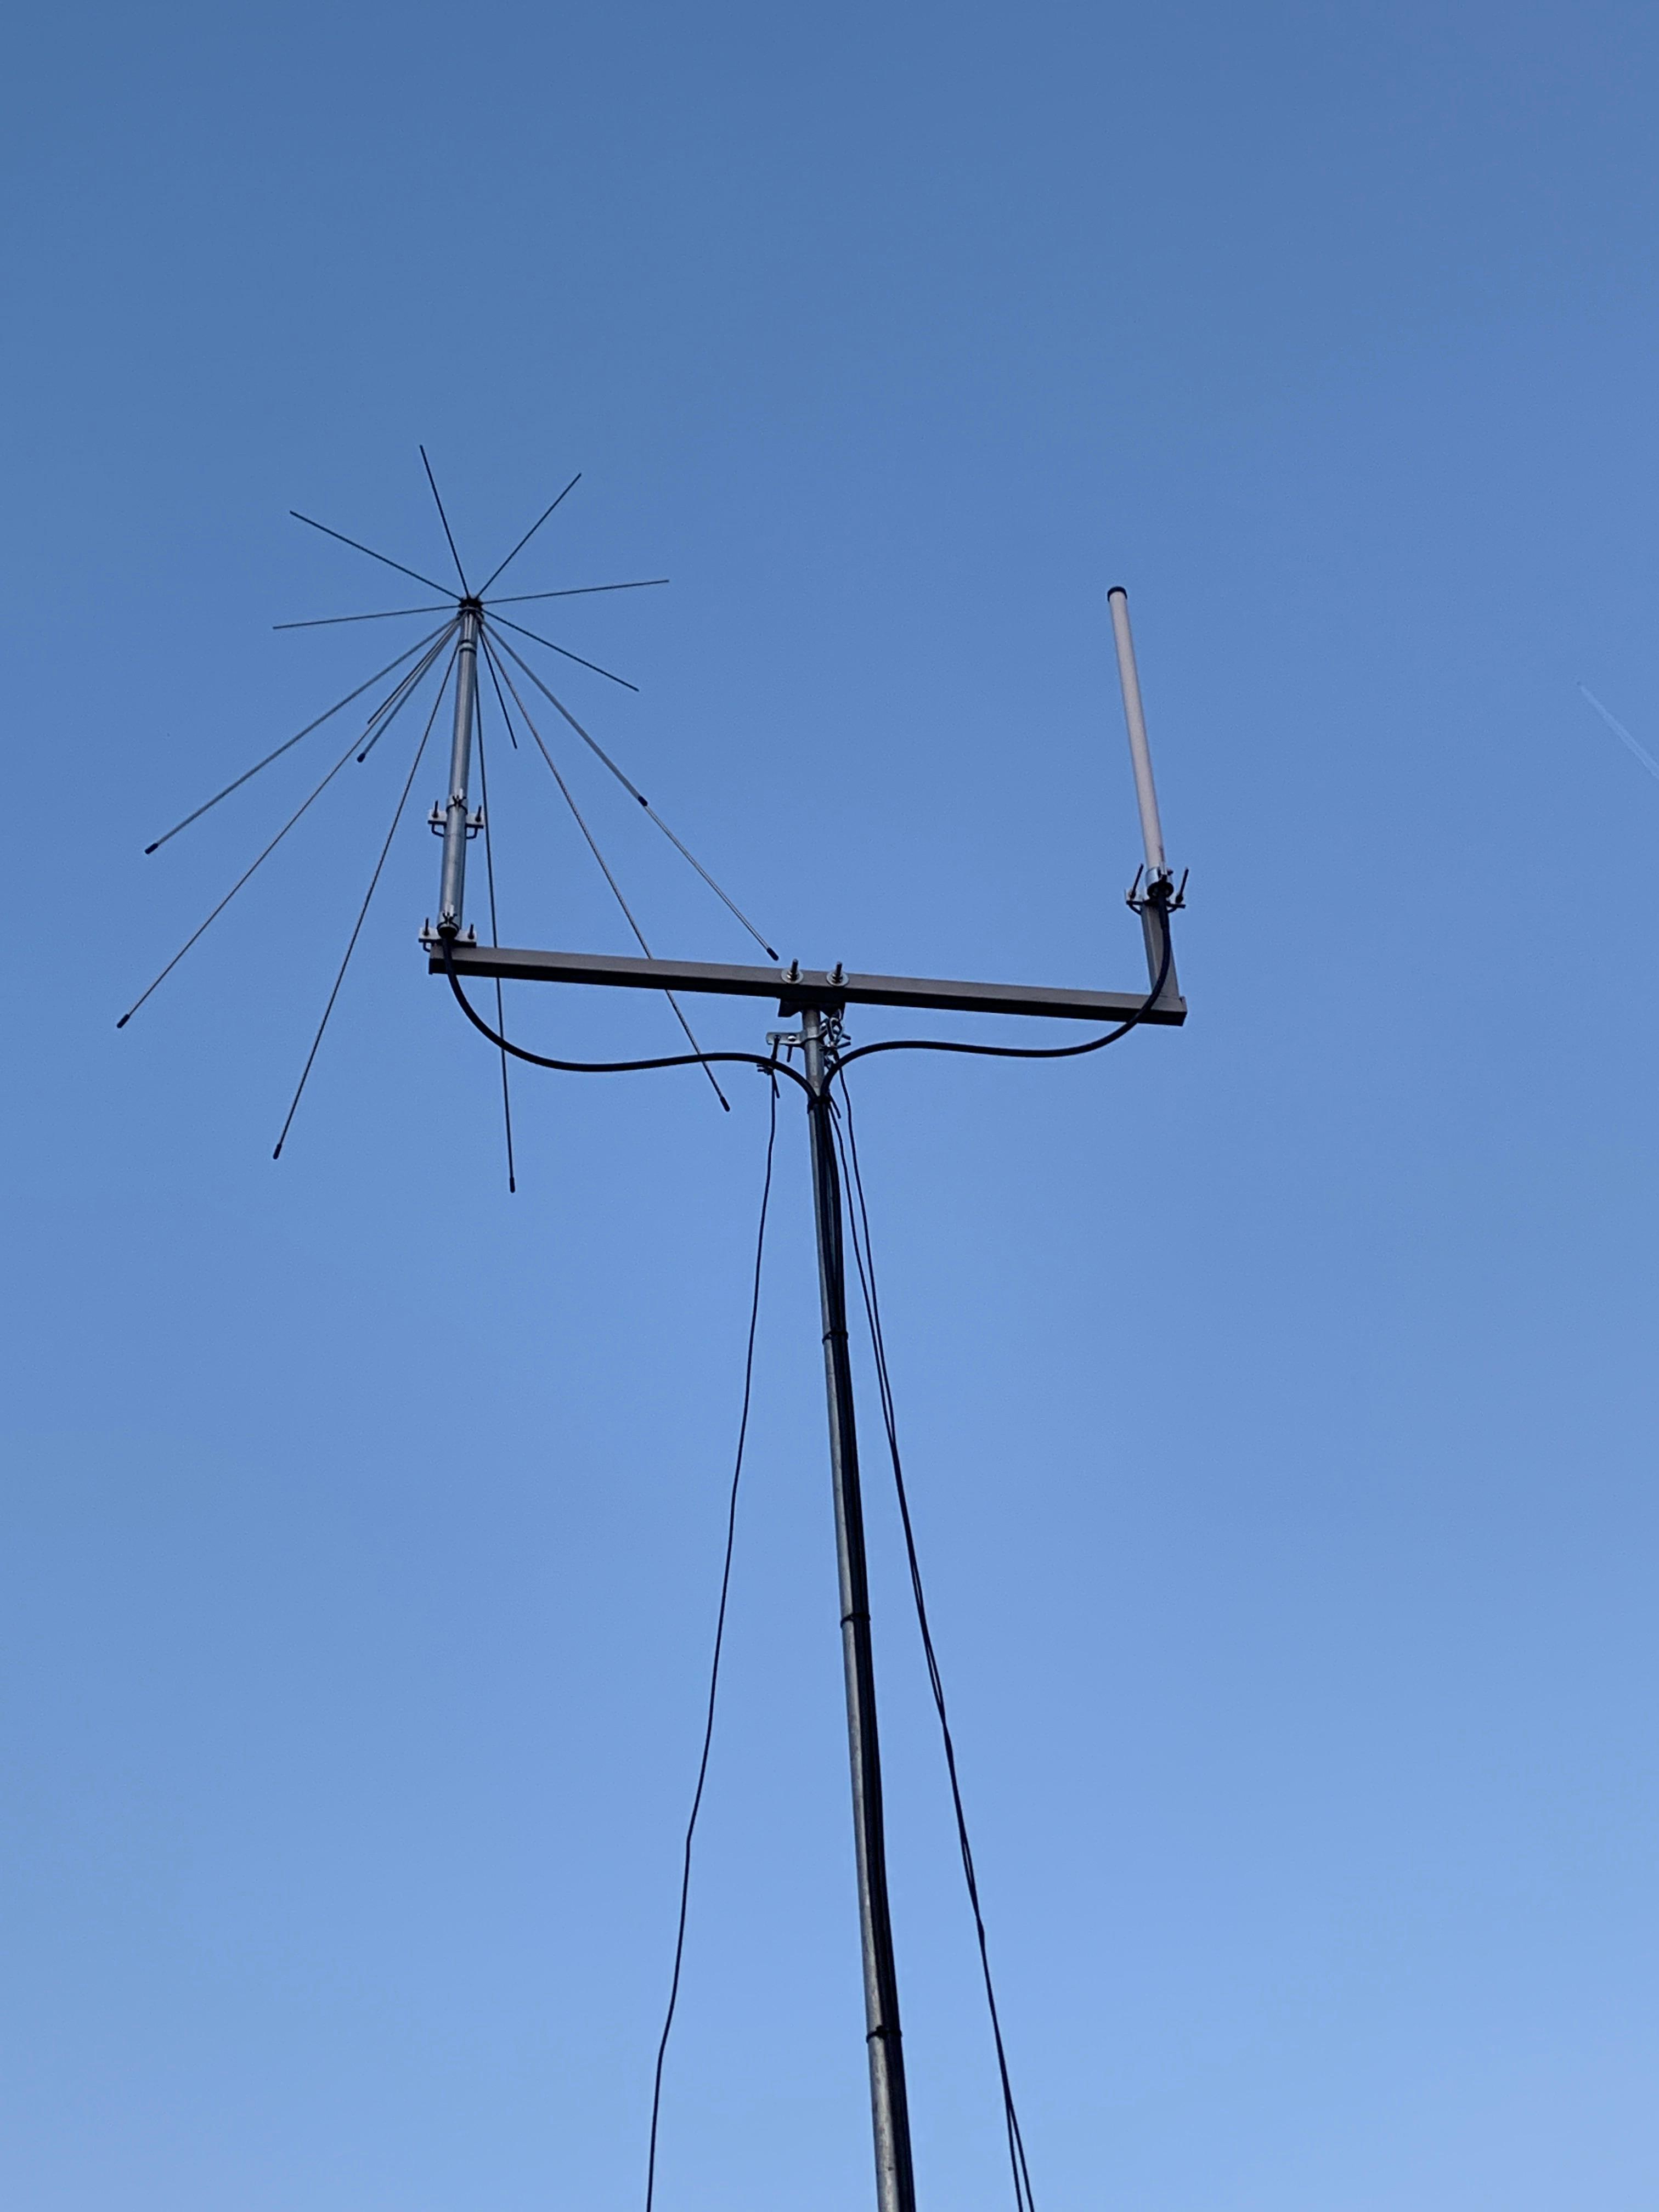 ADS-B Antenna located in Italy